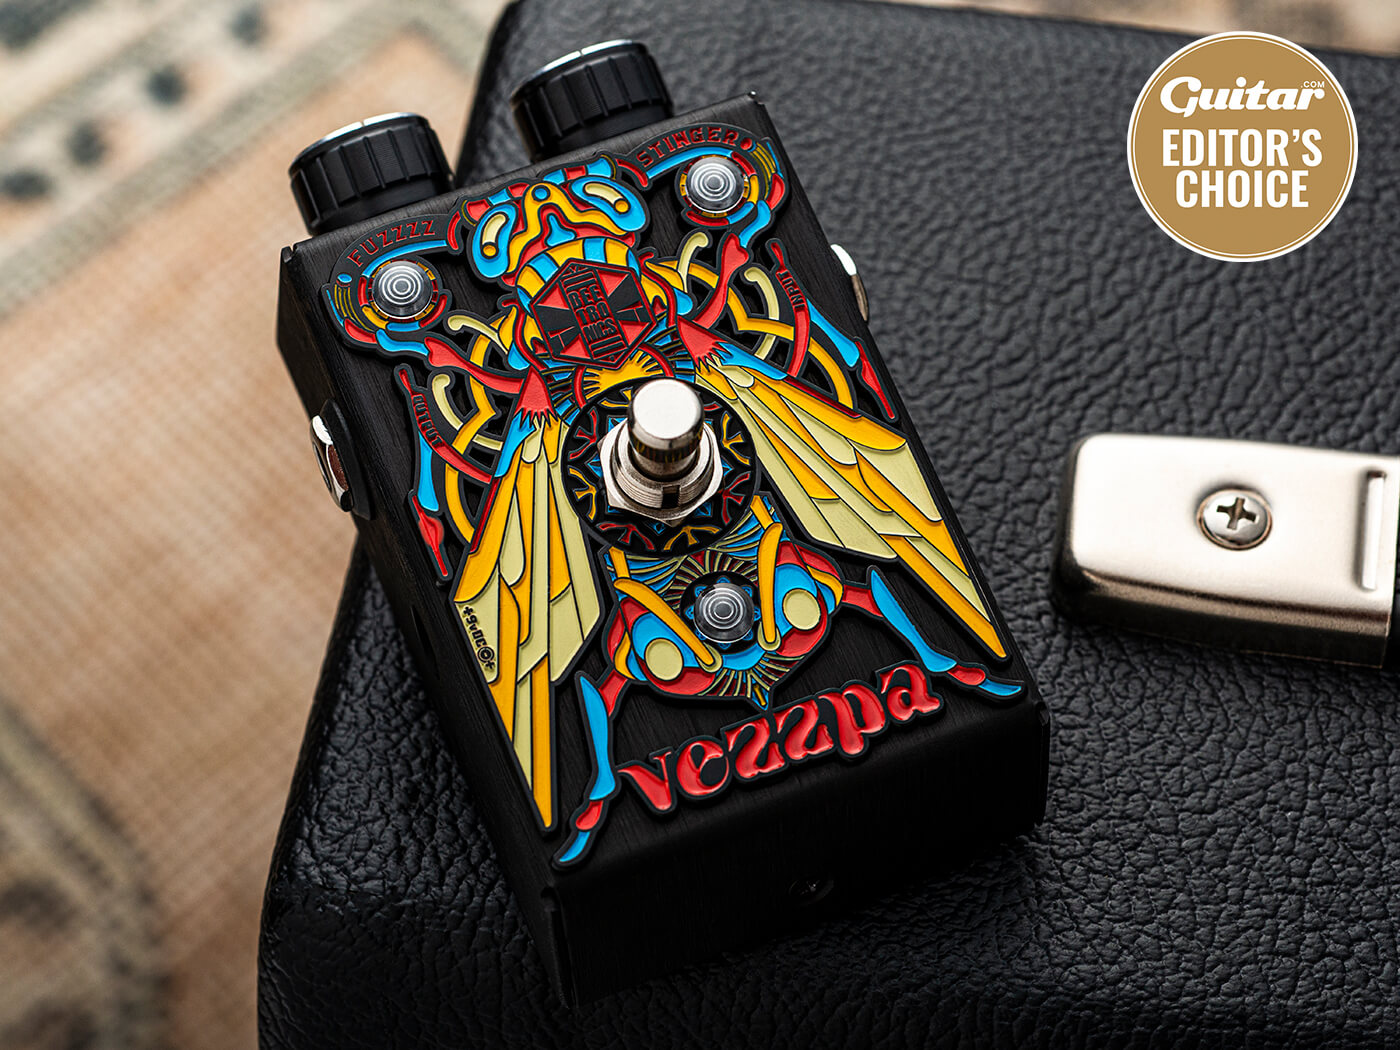 Beetronics Vezzpa Octave Stinger review: angry, inspiring and all 